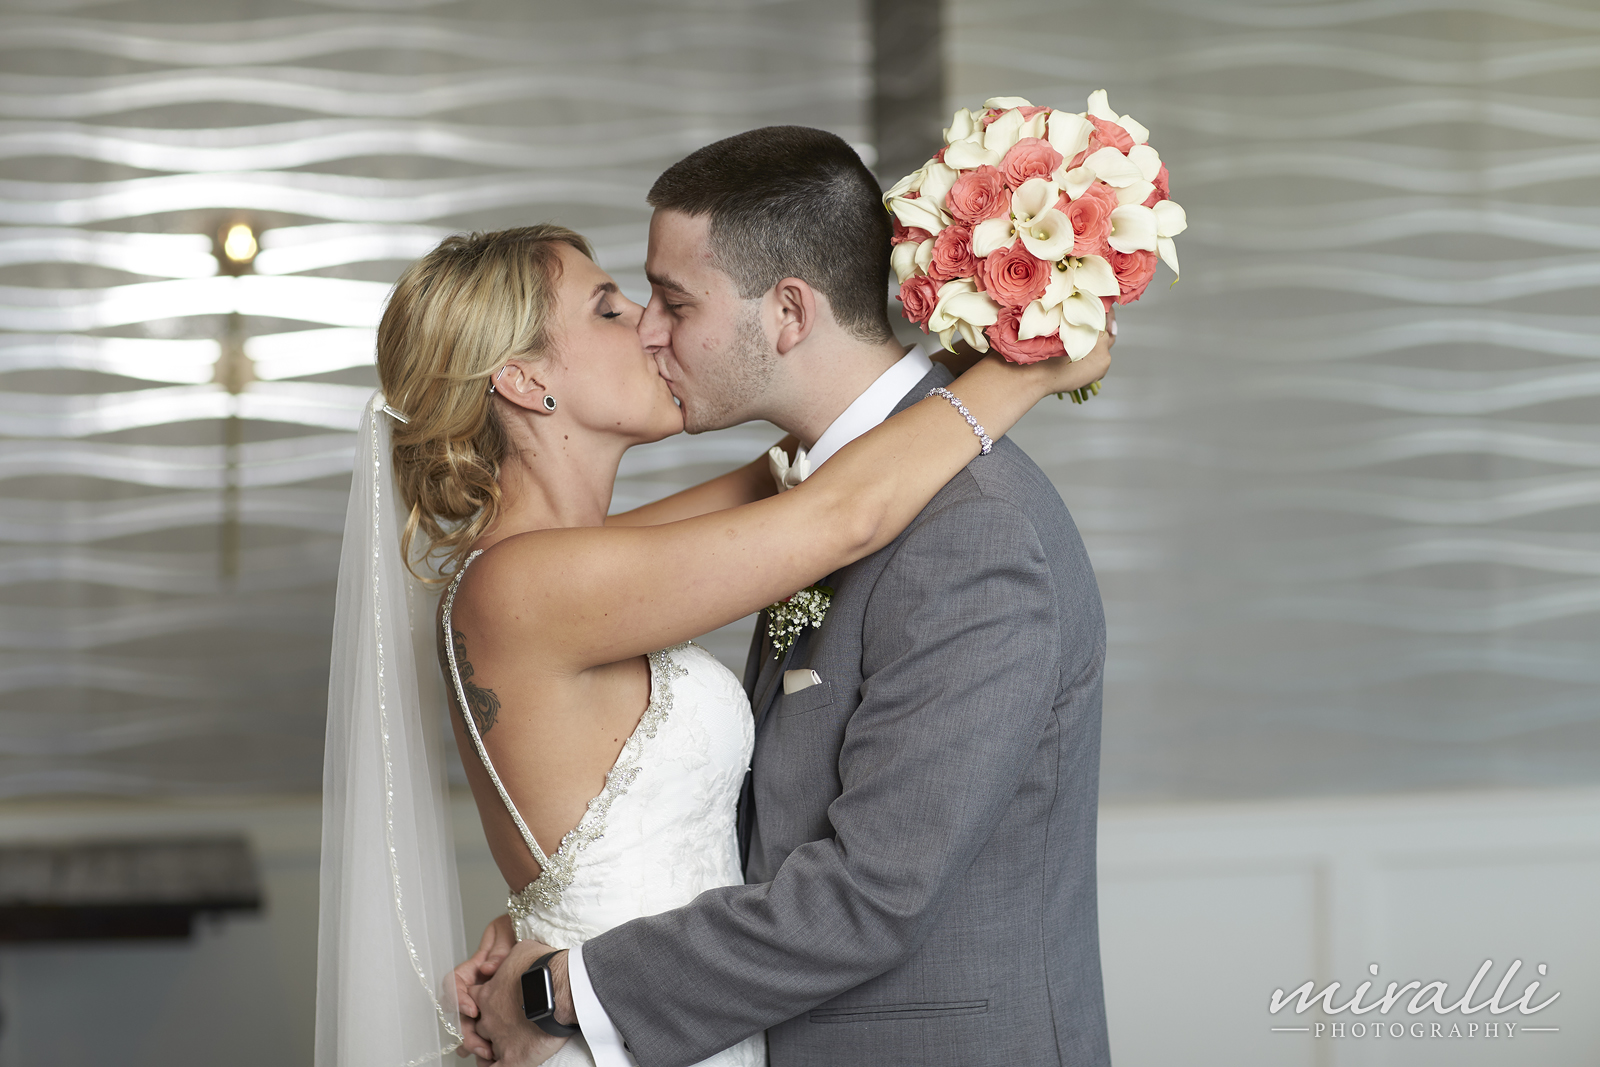 The Piermont Wedding Photos by Miralli Photography